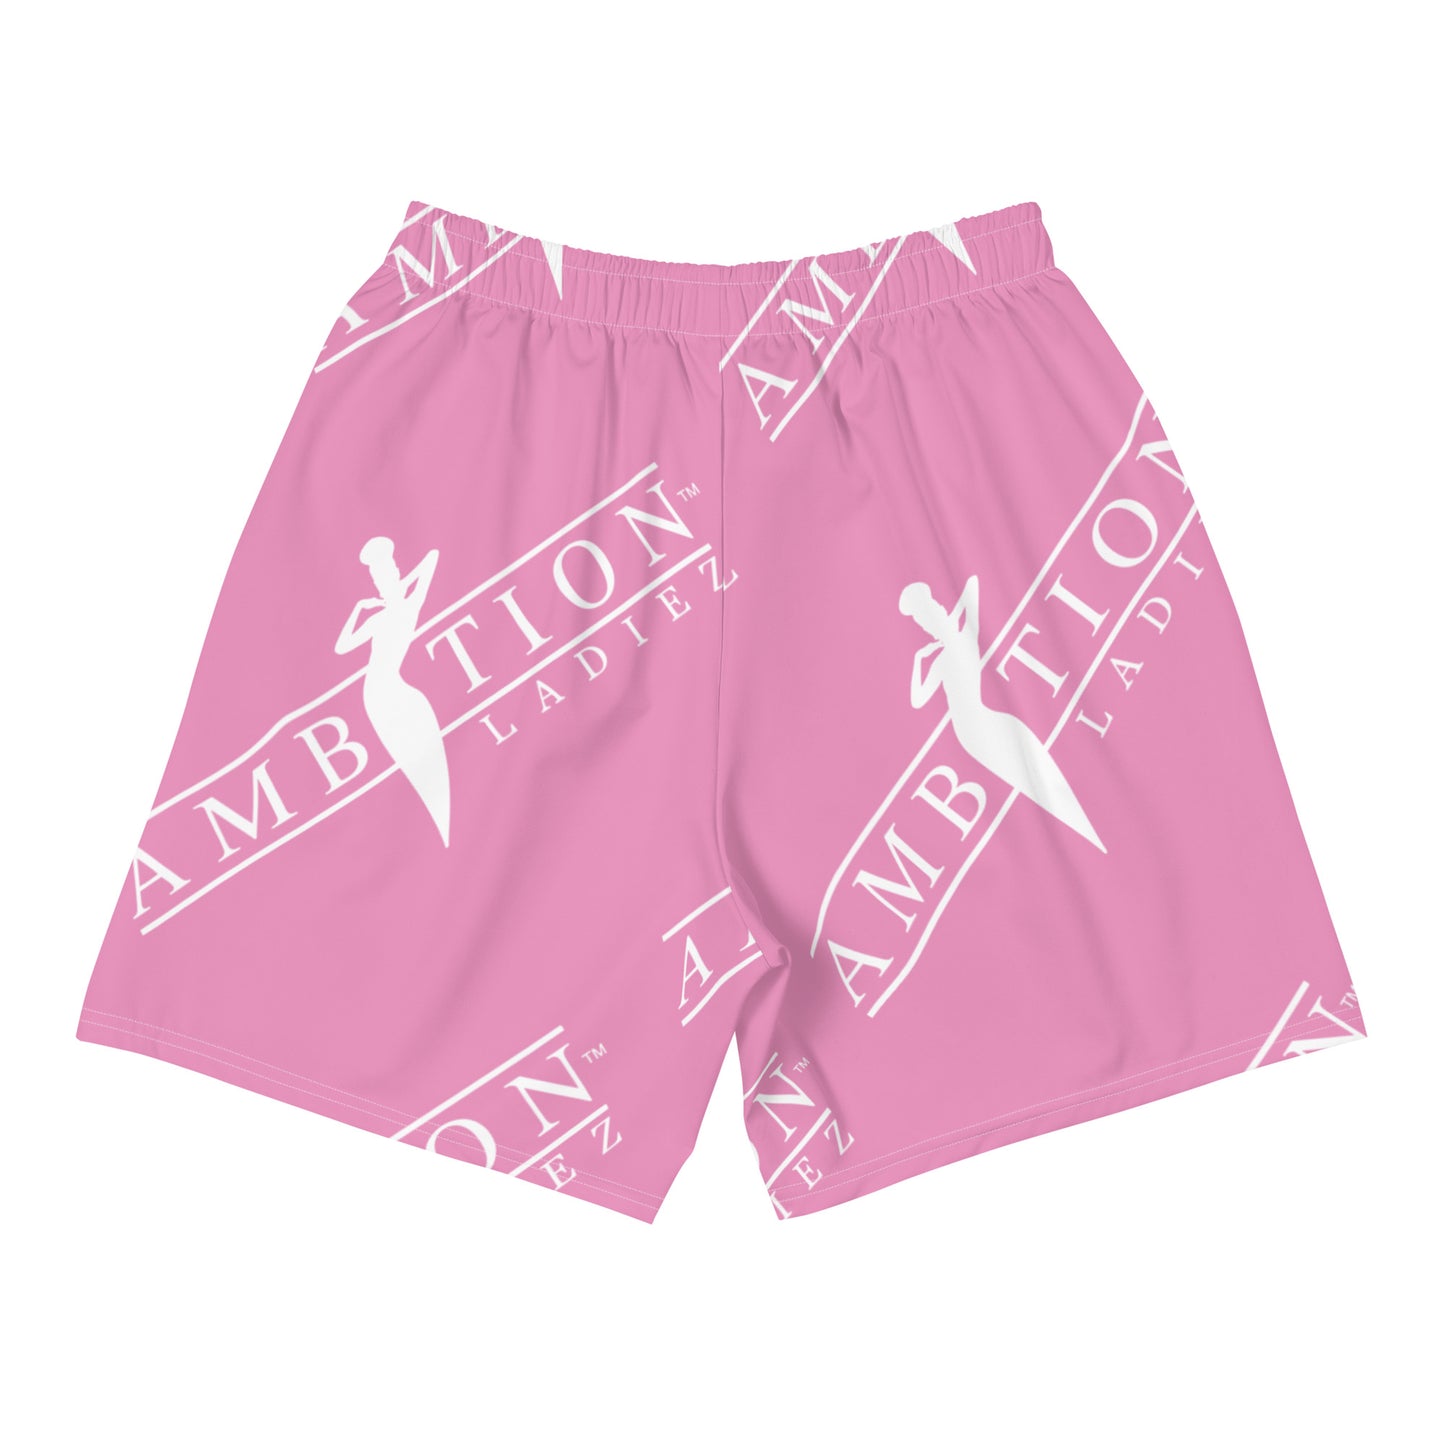 Sports Shorts in pink color